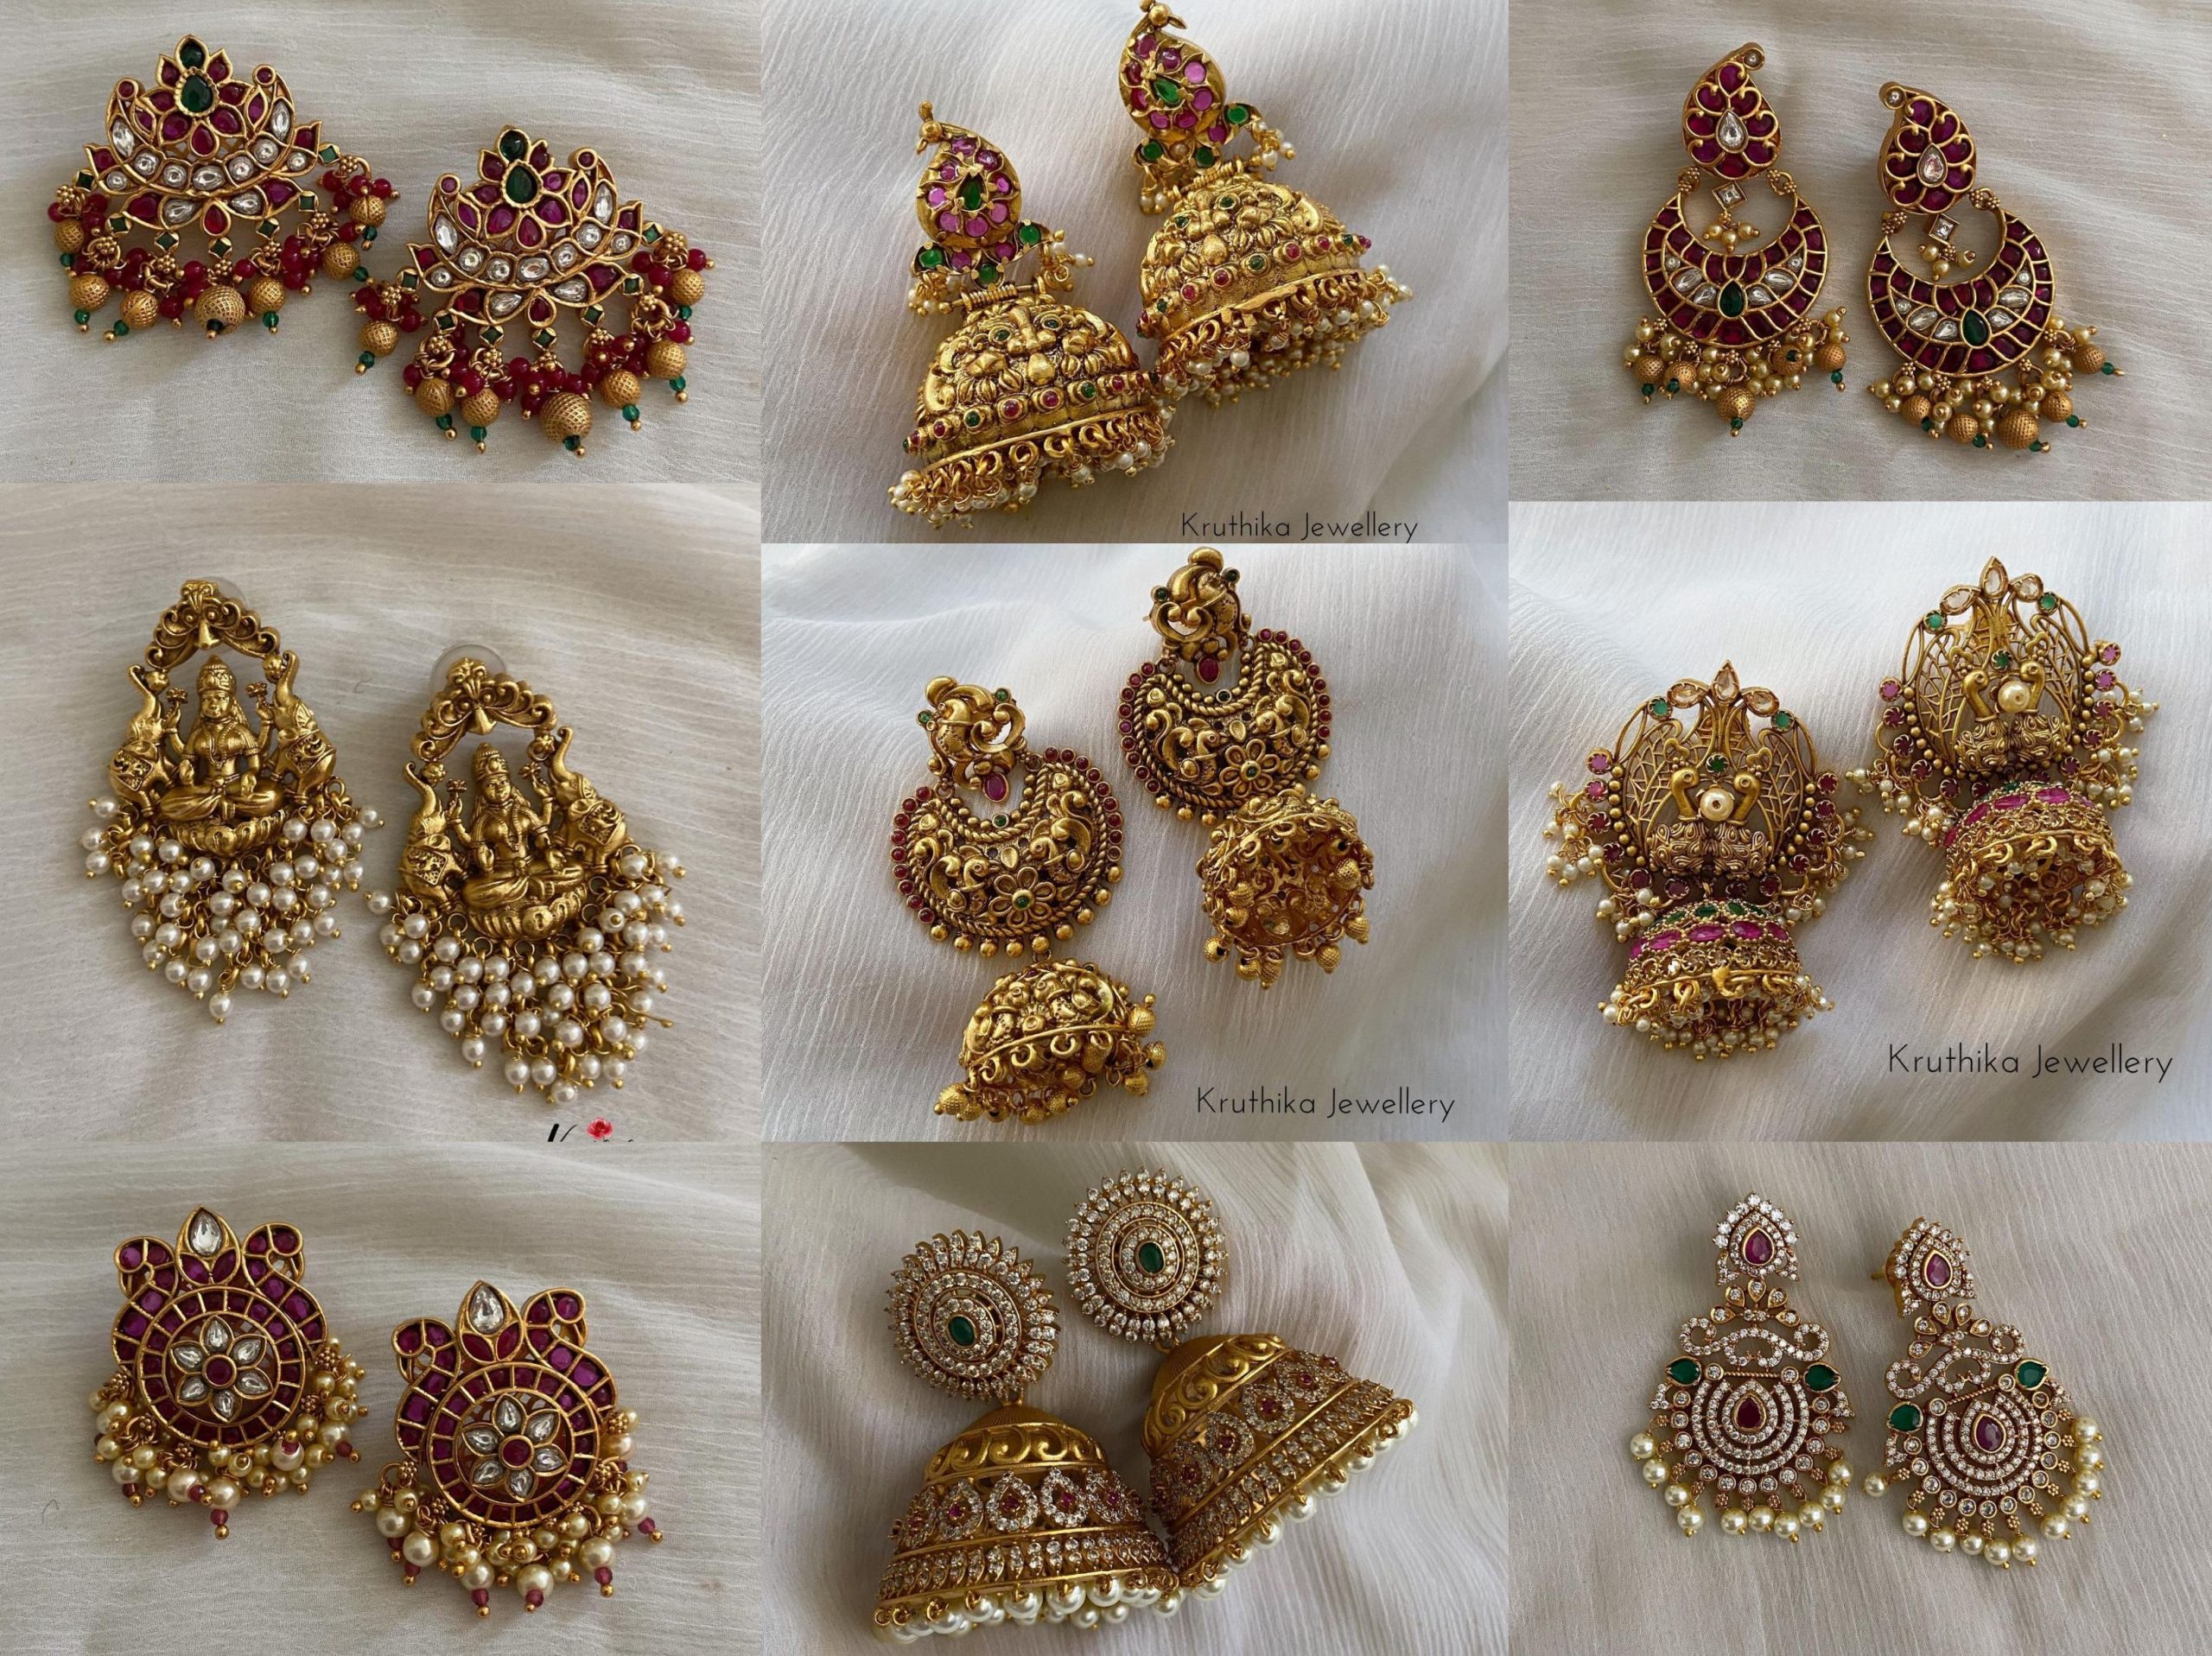 Antique Imitation Earrings Collection By Kruthika Jewellery!